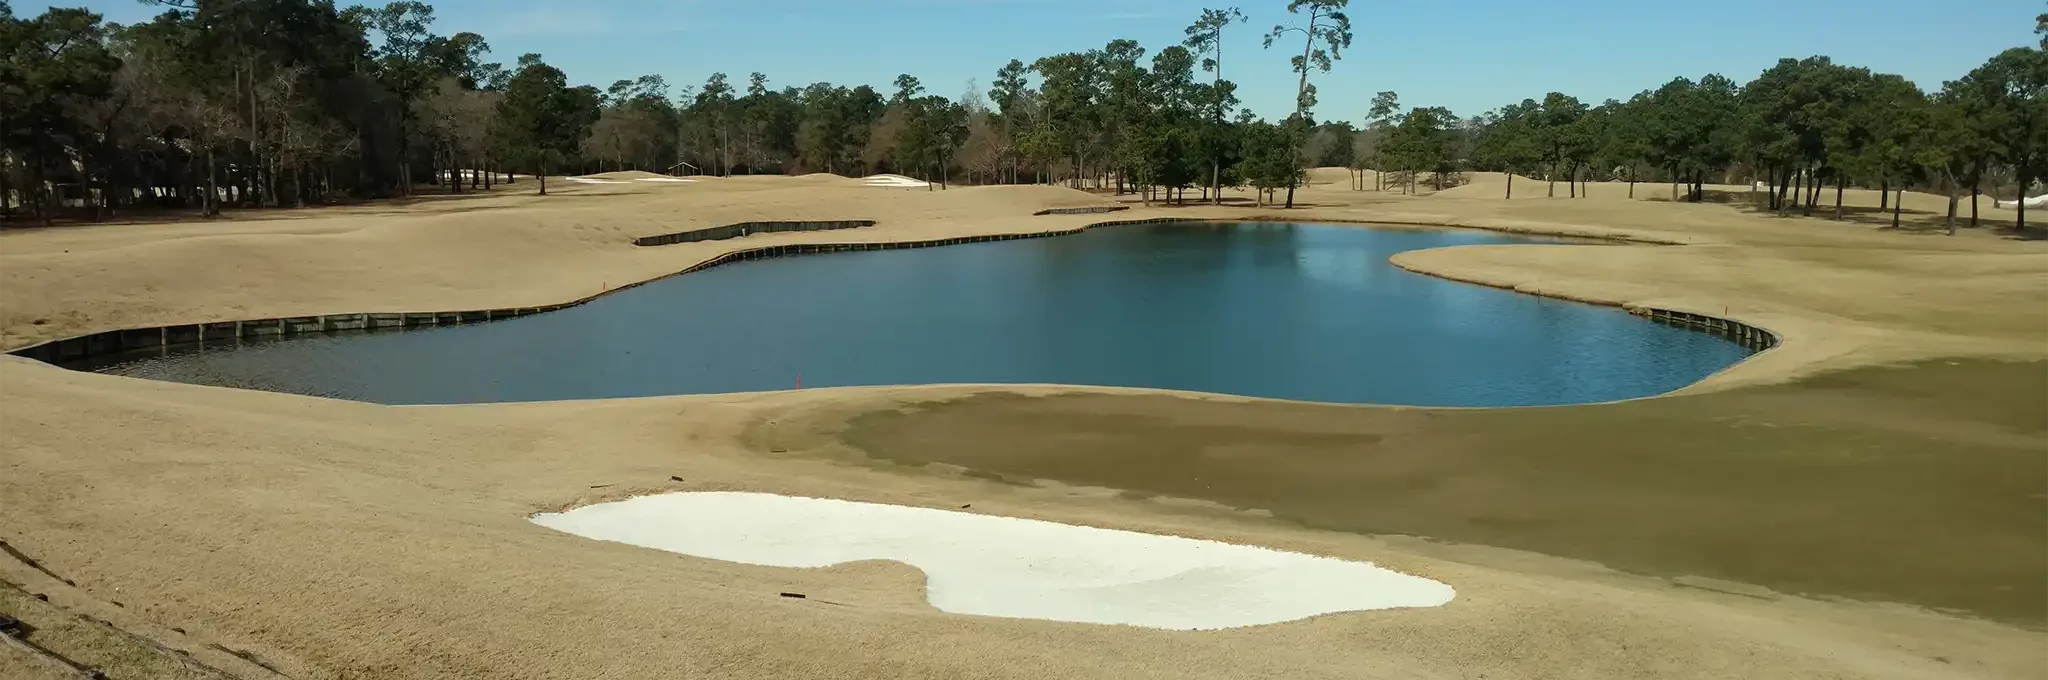 Premier White sand used in a golf course bunker with a lake and trees visible in the background.